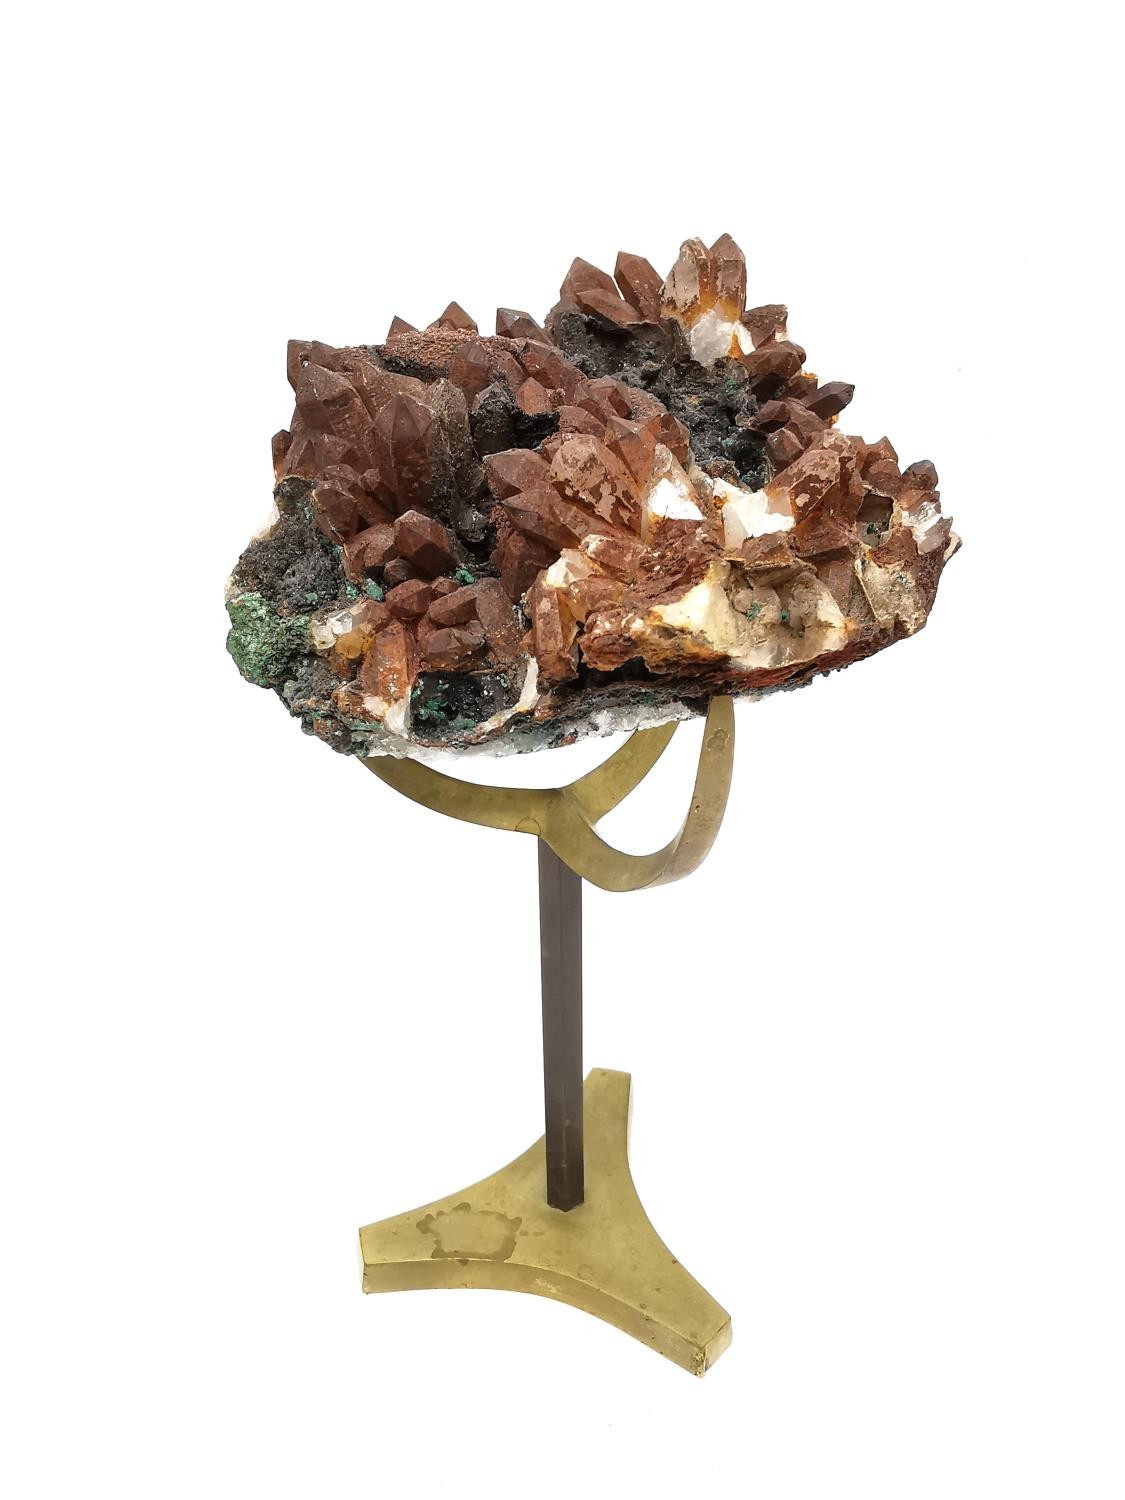 A Limonite stained quartz and malachite crystal specimen from Durango, Mexico. Mounted on brass - Image 4 of 8